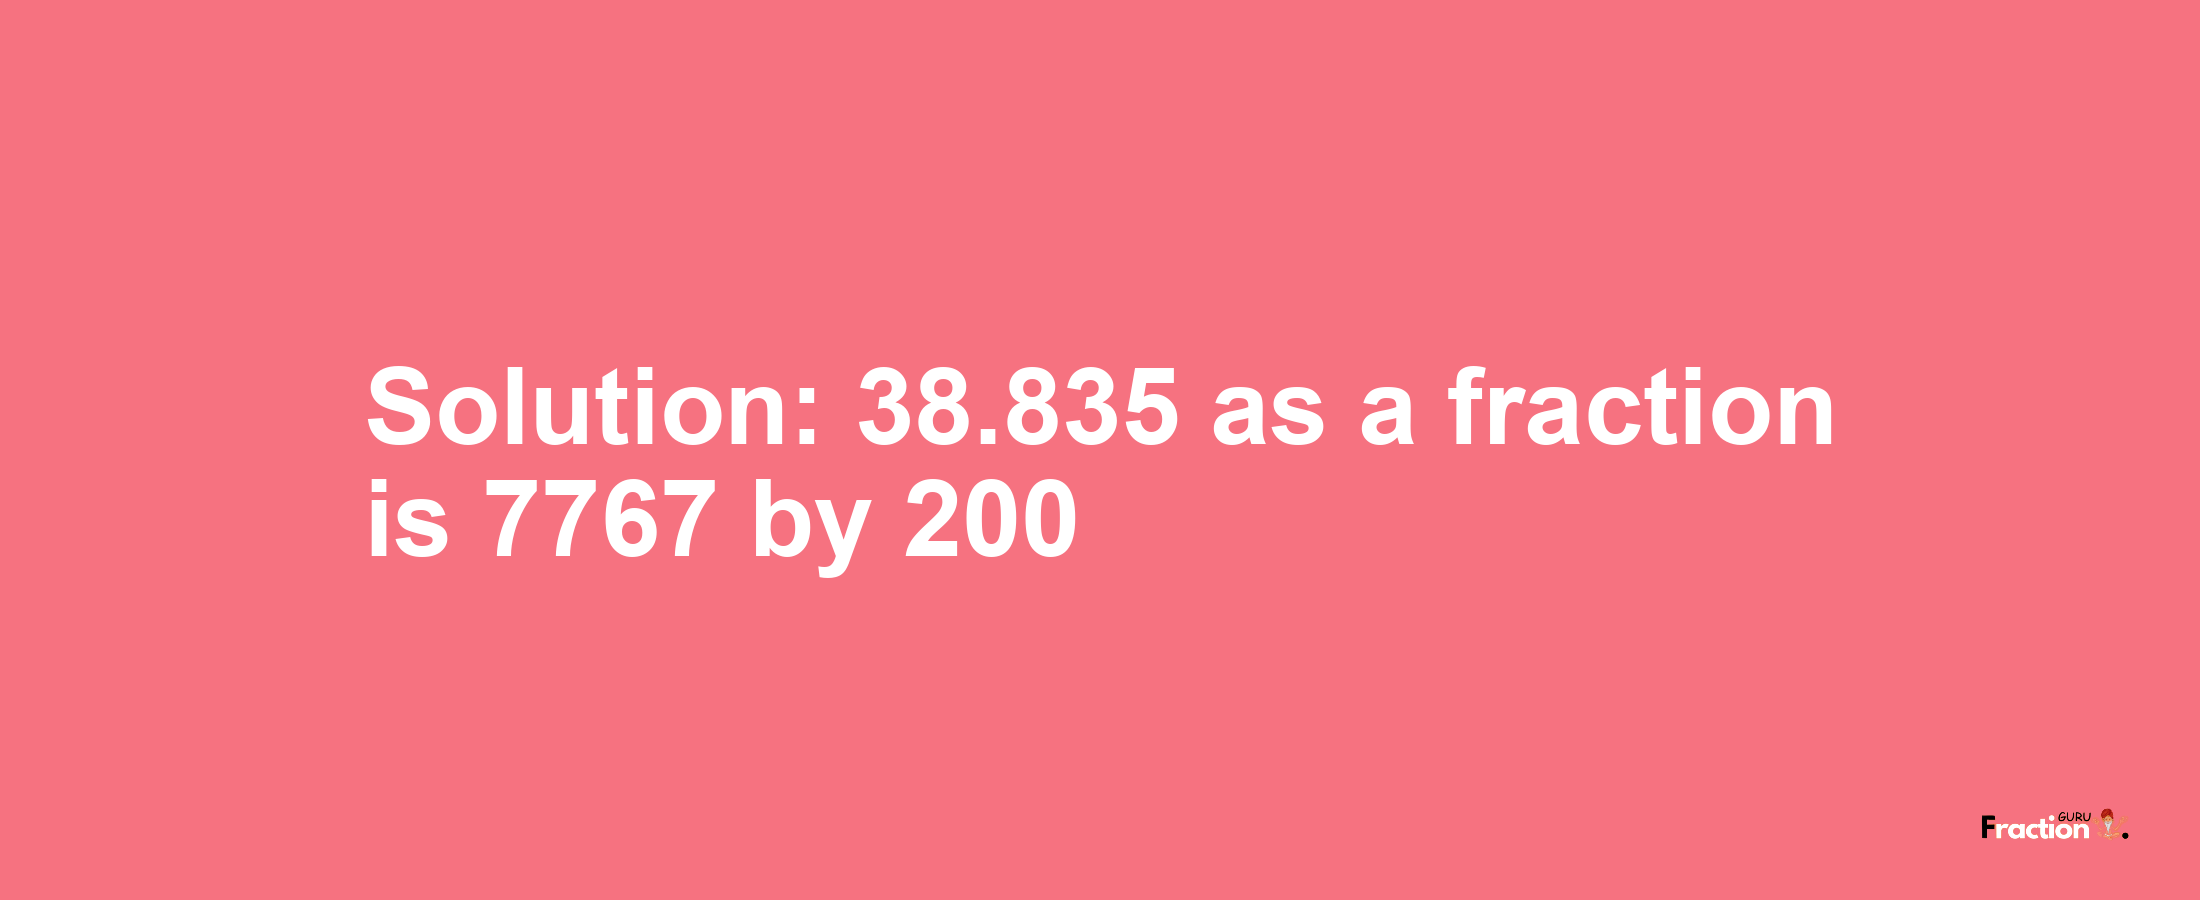 Solution:38.835 as a fraction is 7767/200